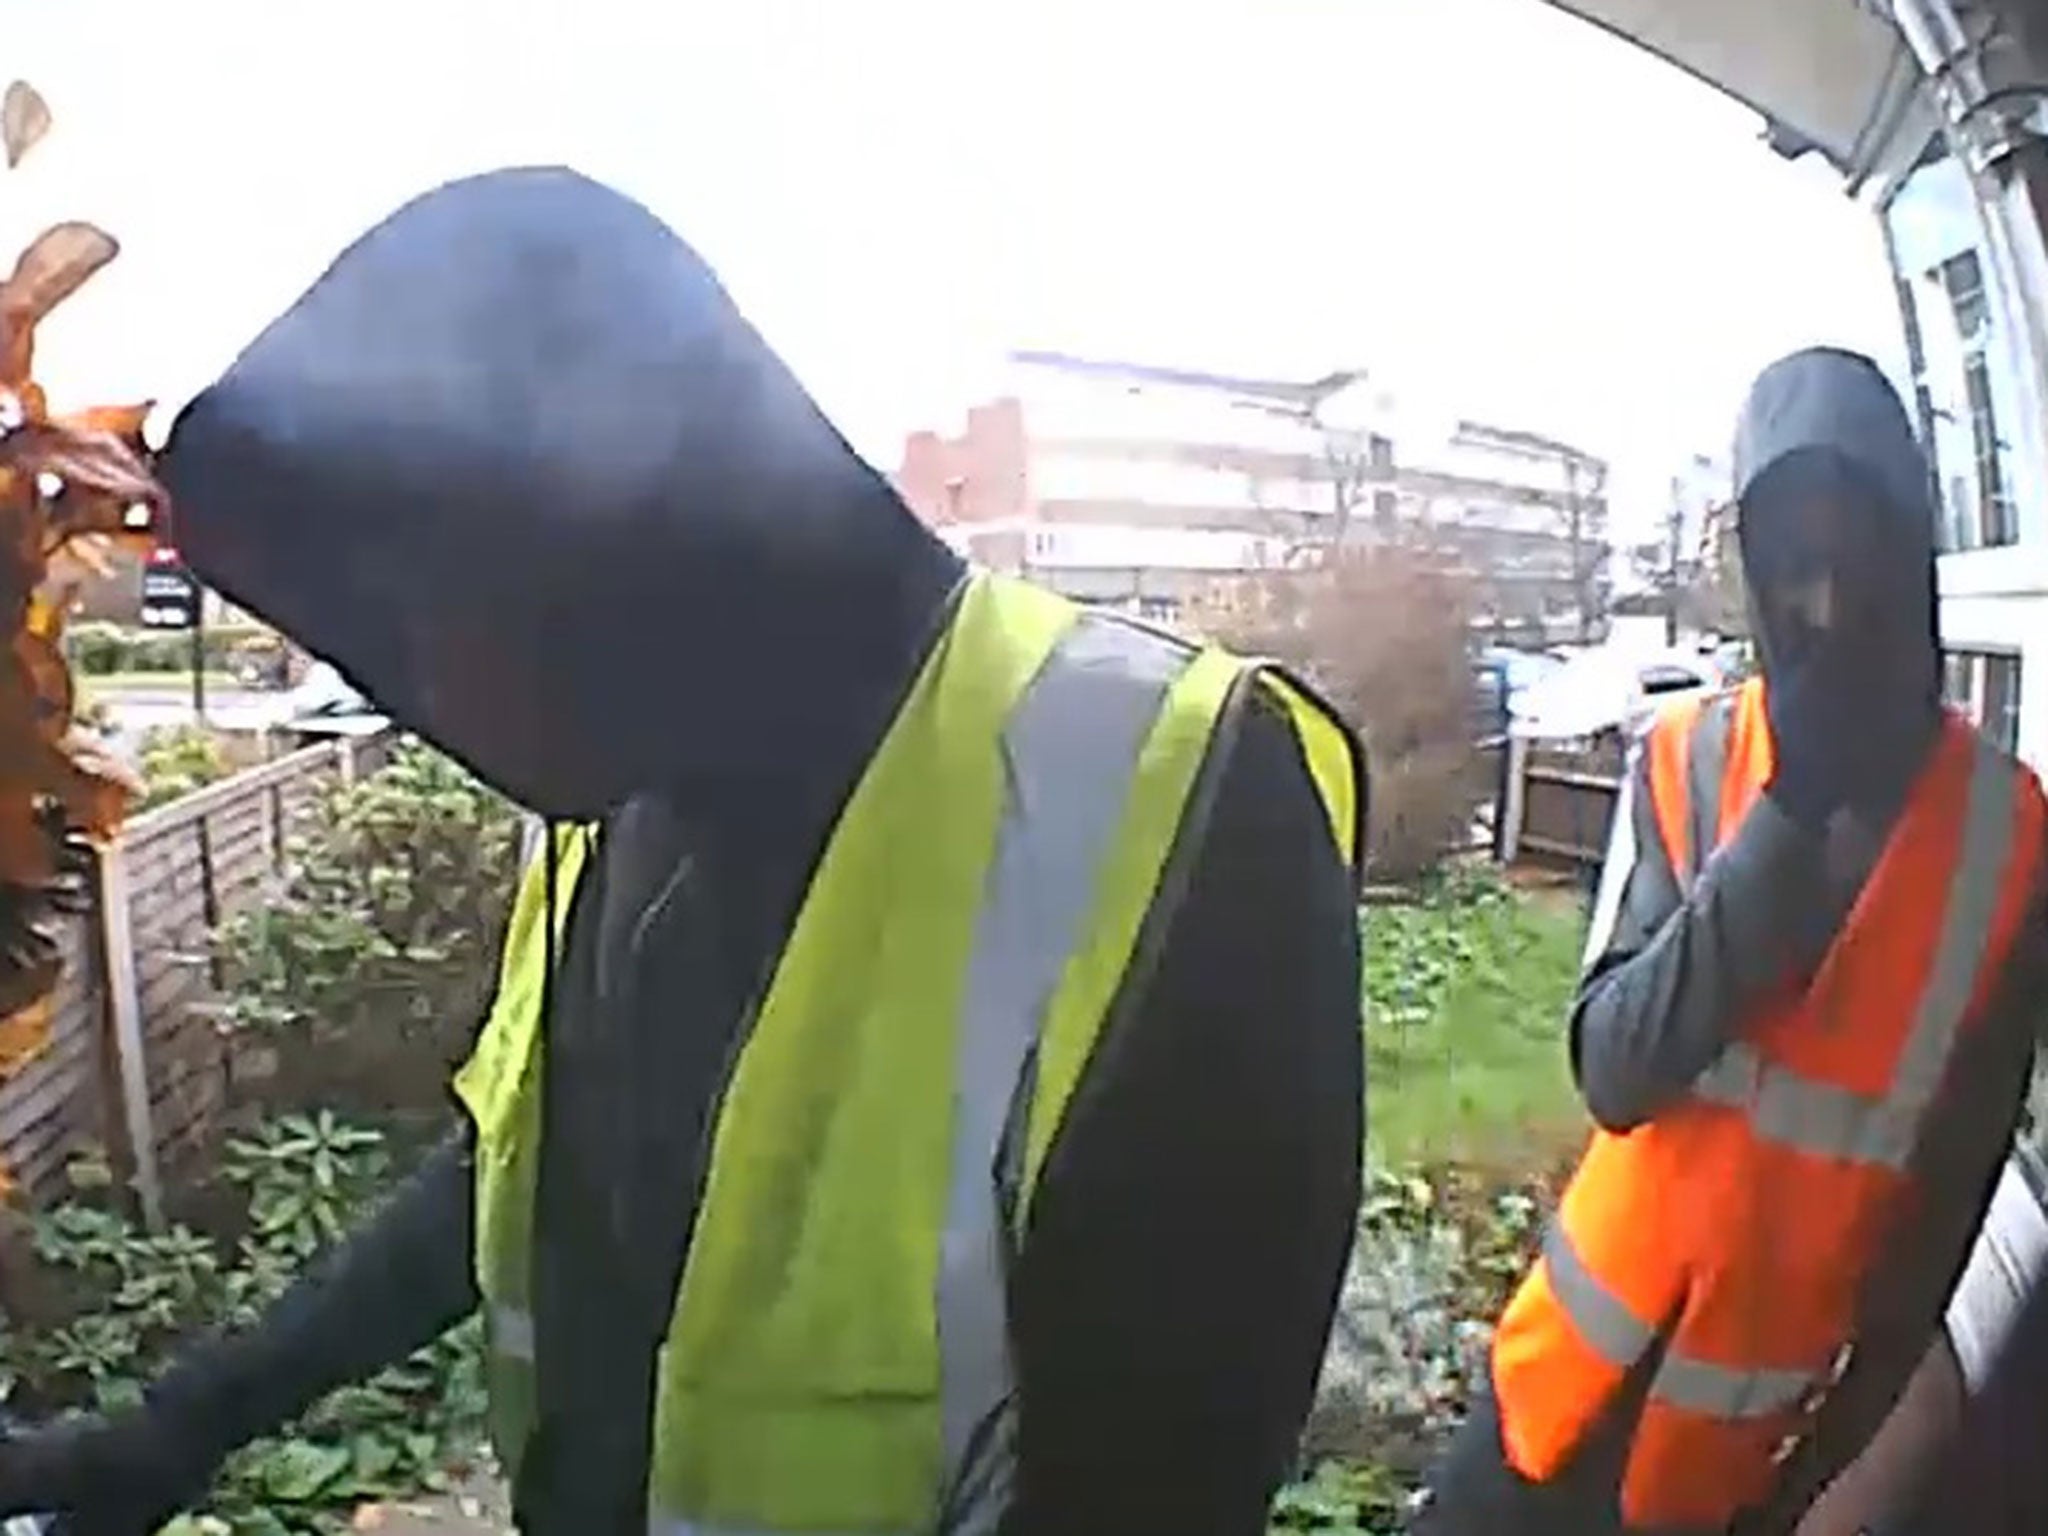 Police would like to speak to this man regarding a kidnapping and burglary in Croydon